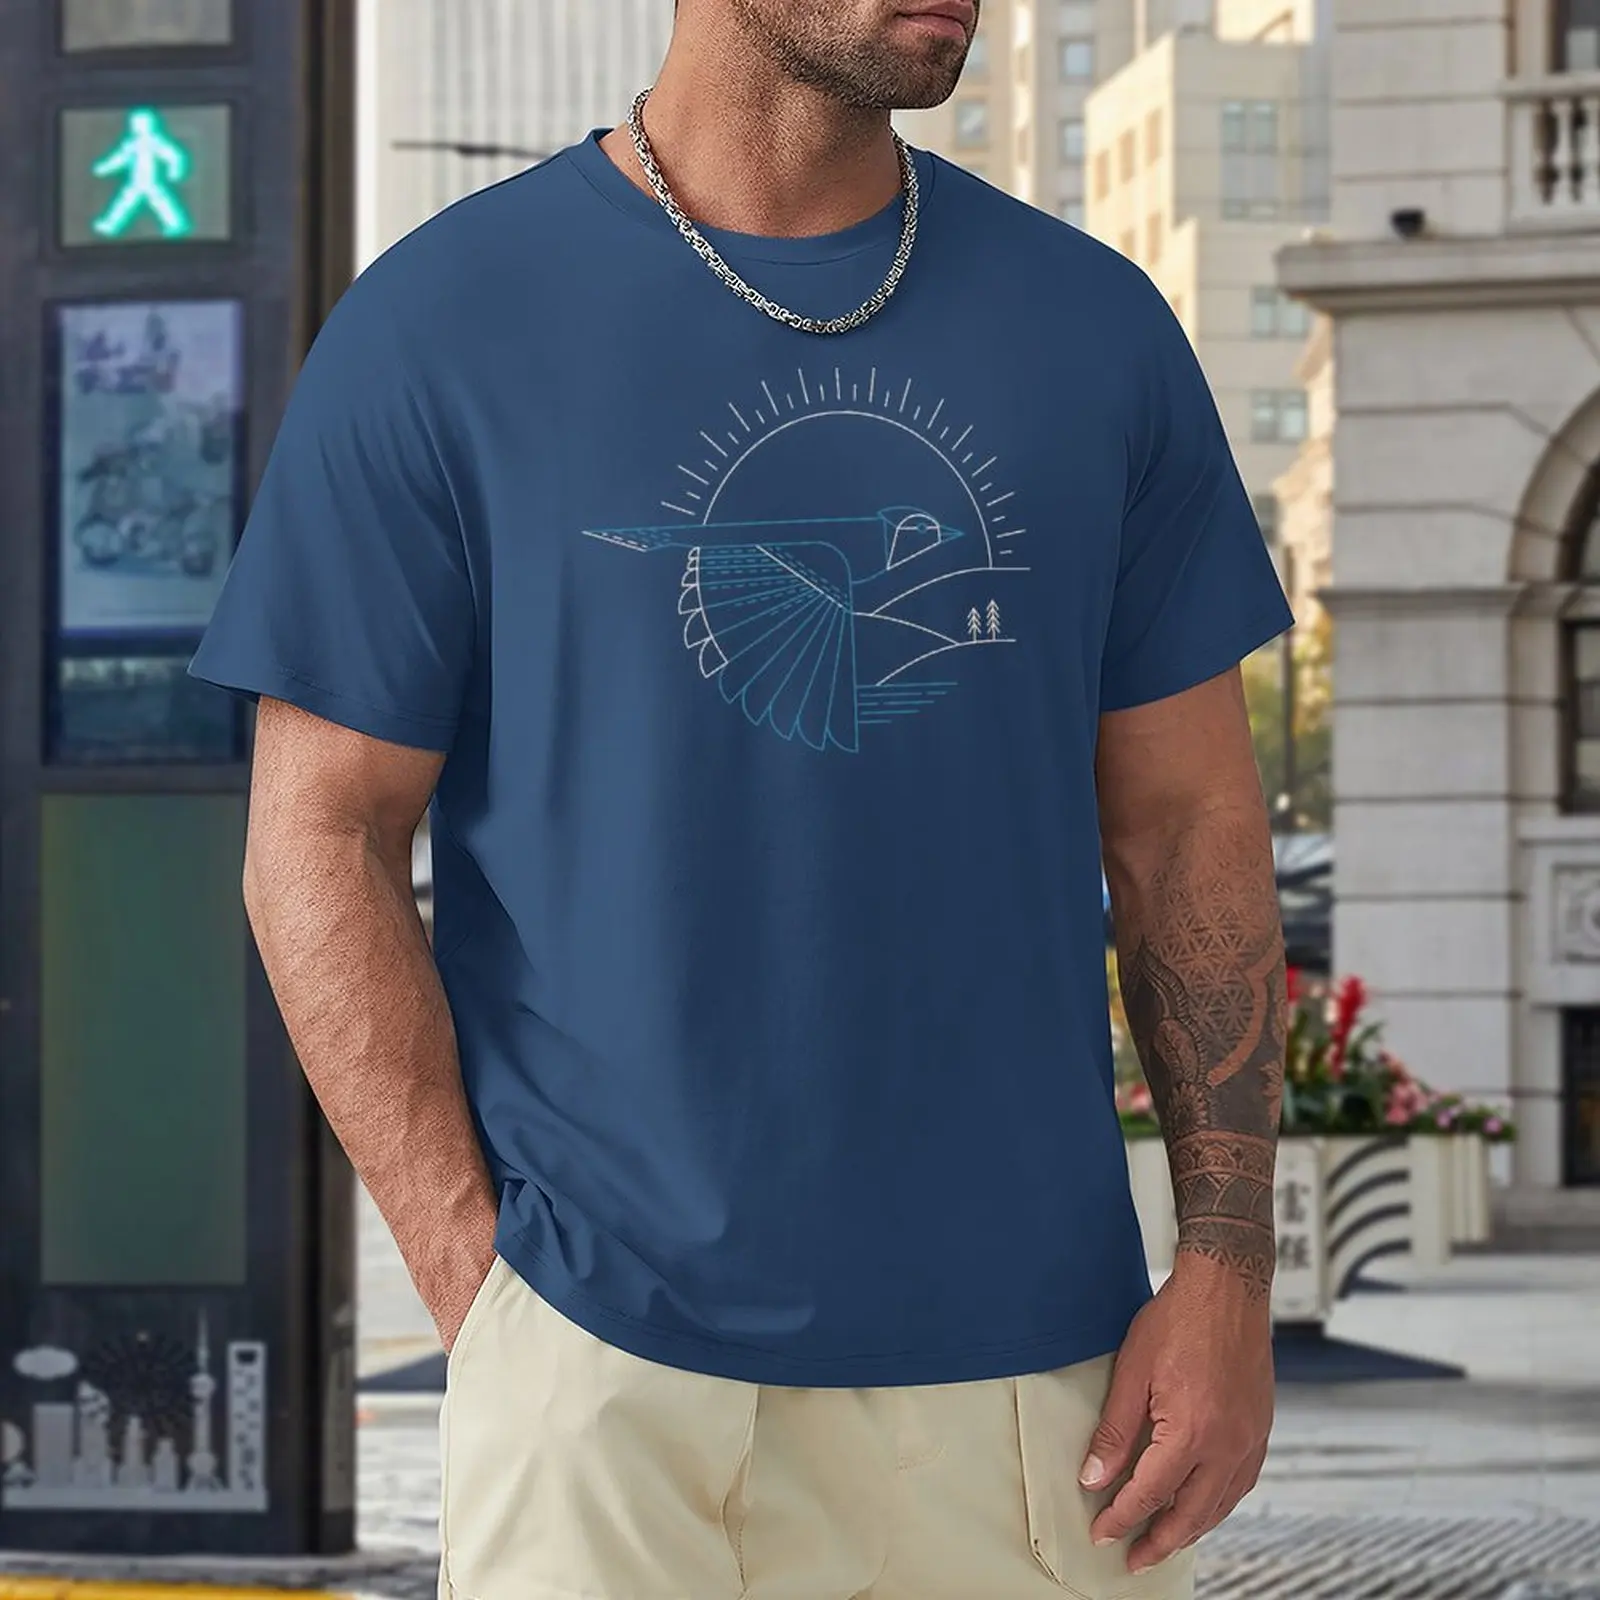 Mordecai the Blue Jay T-Shirt hippie clothes custom t shirts workout shirts  for men - AliExpress